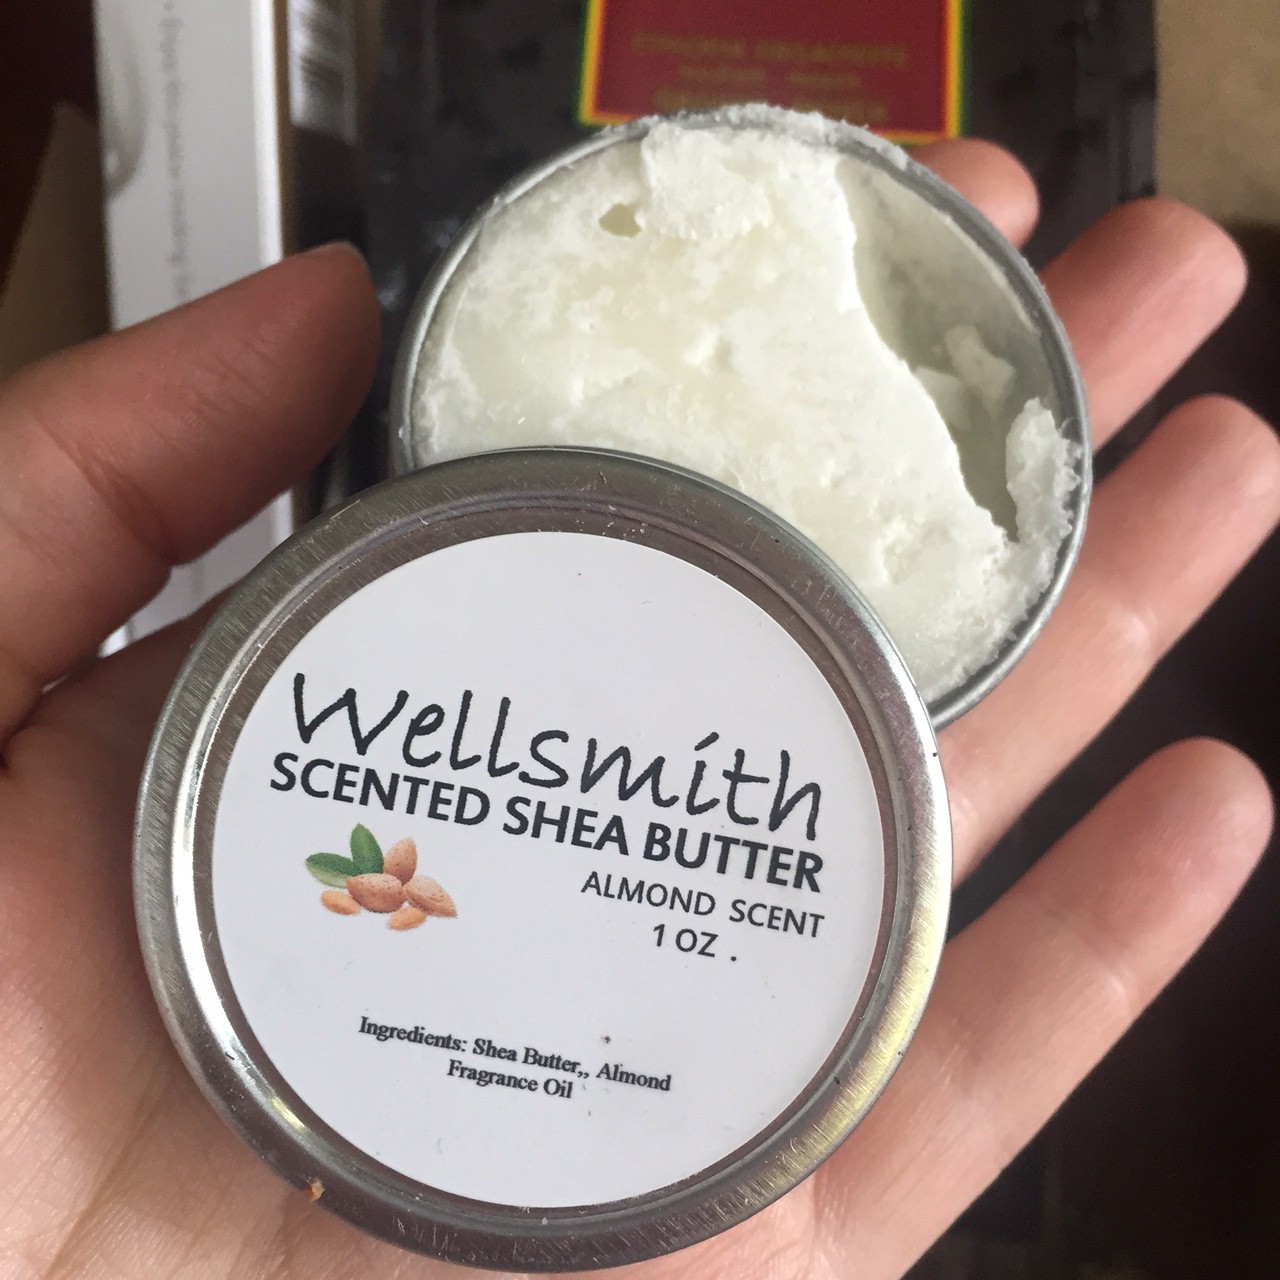 Wellsmith Scented Shea Butter